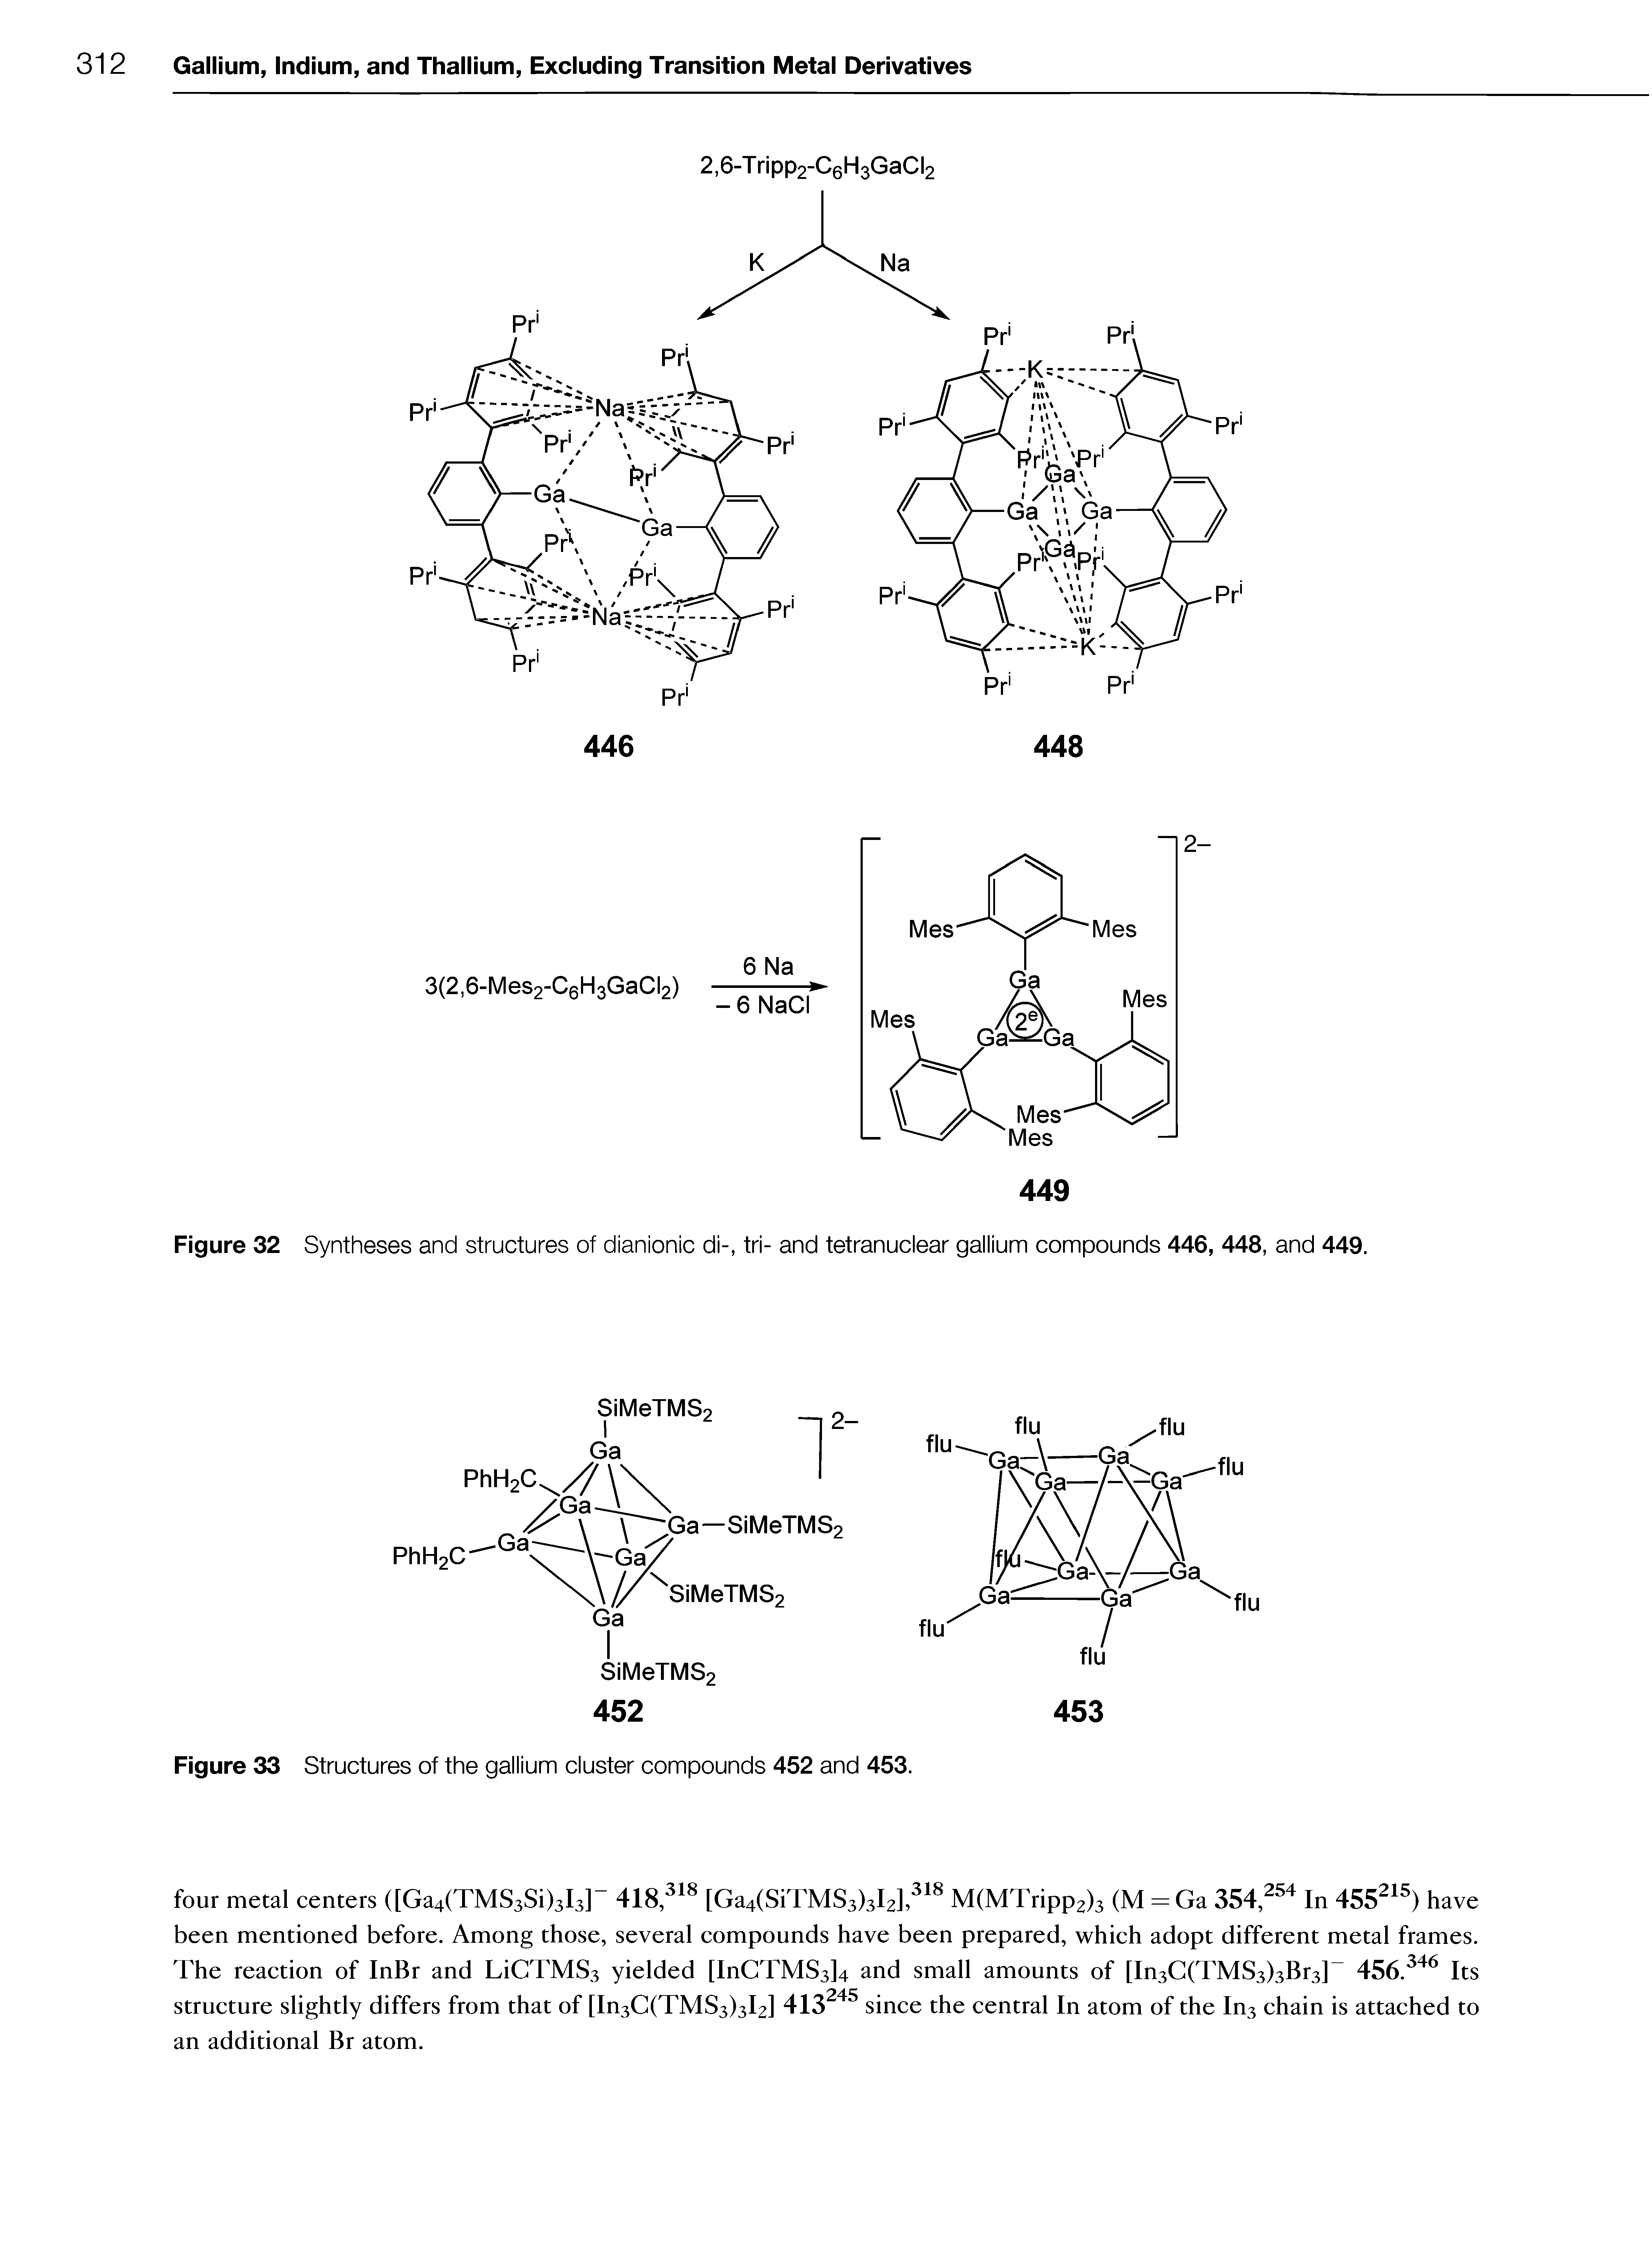 Figure 32 Syntheses and structures of dianionic di-, tri- and tetranuclear gallium compounds 446, 448, and 449.